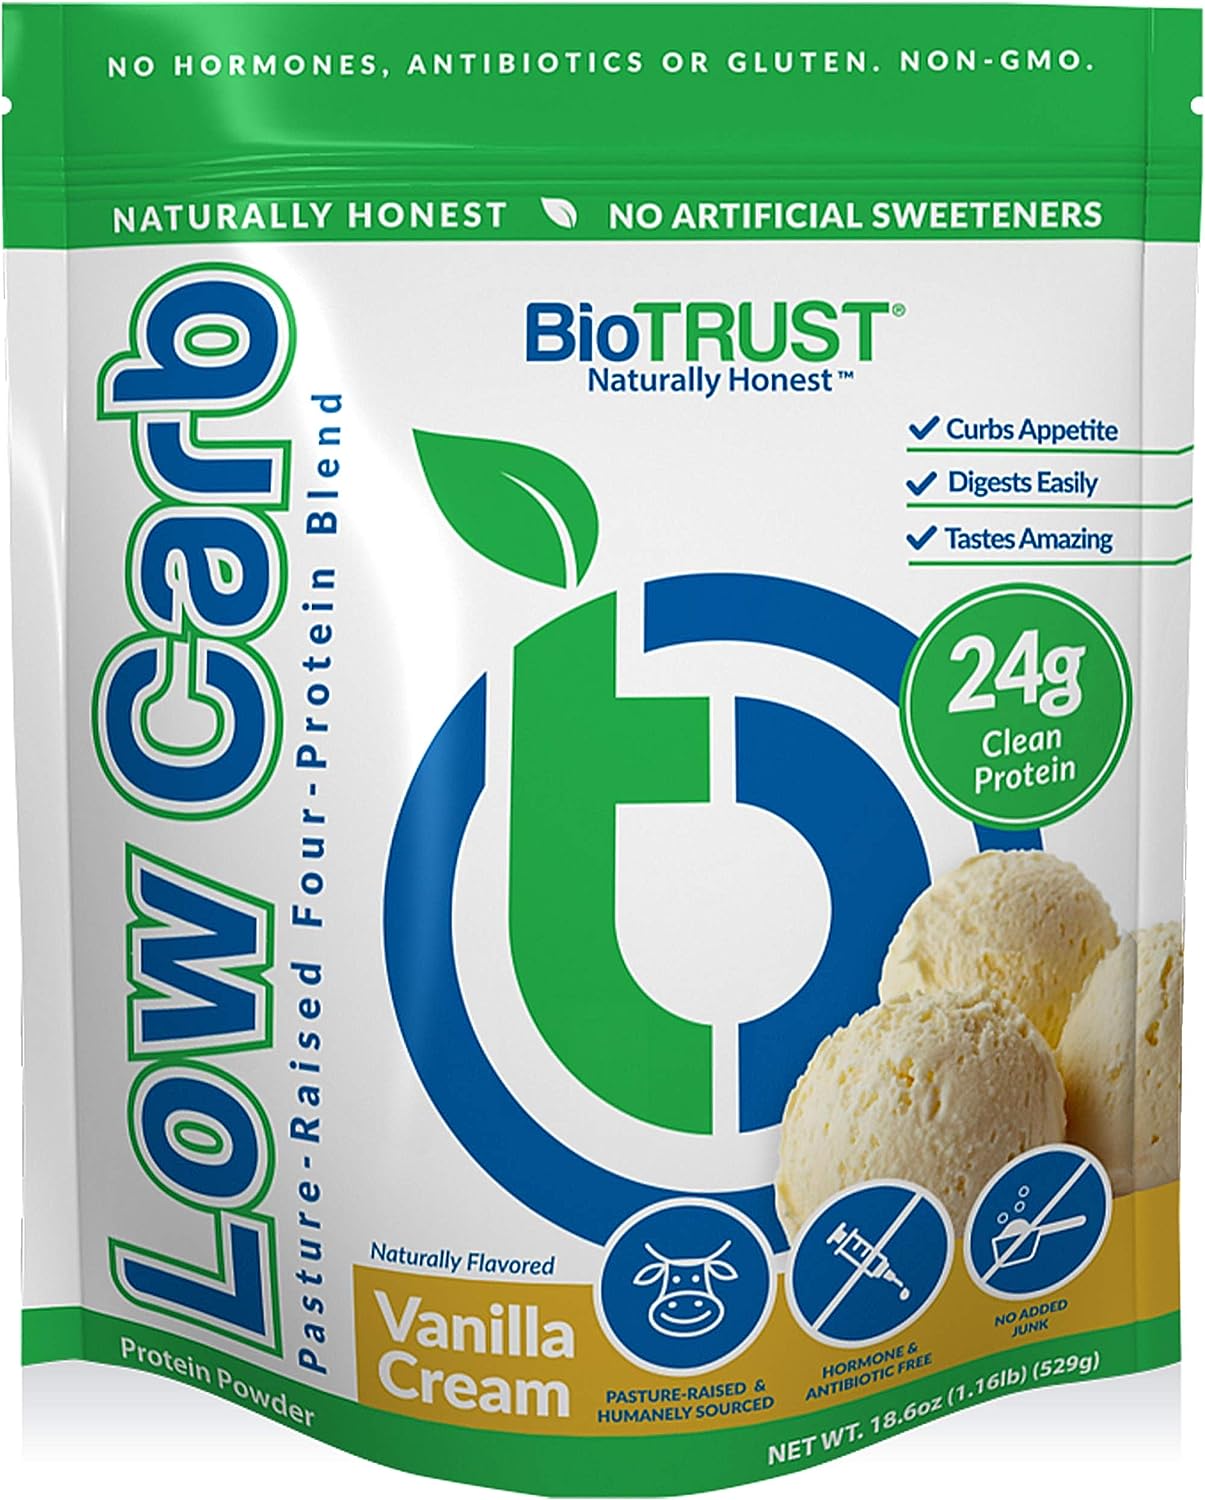 BioTrust-Low-Carb-Natural-and-Delicious-249